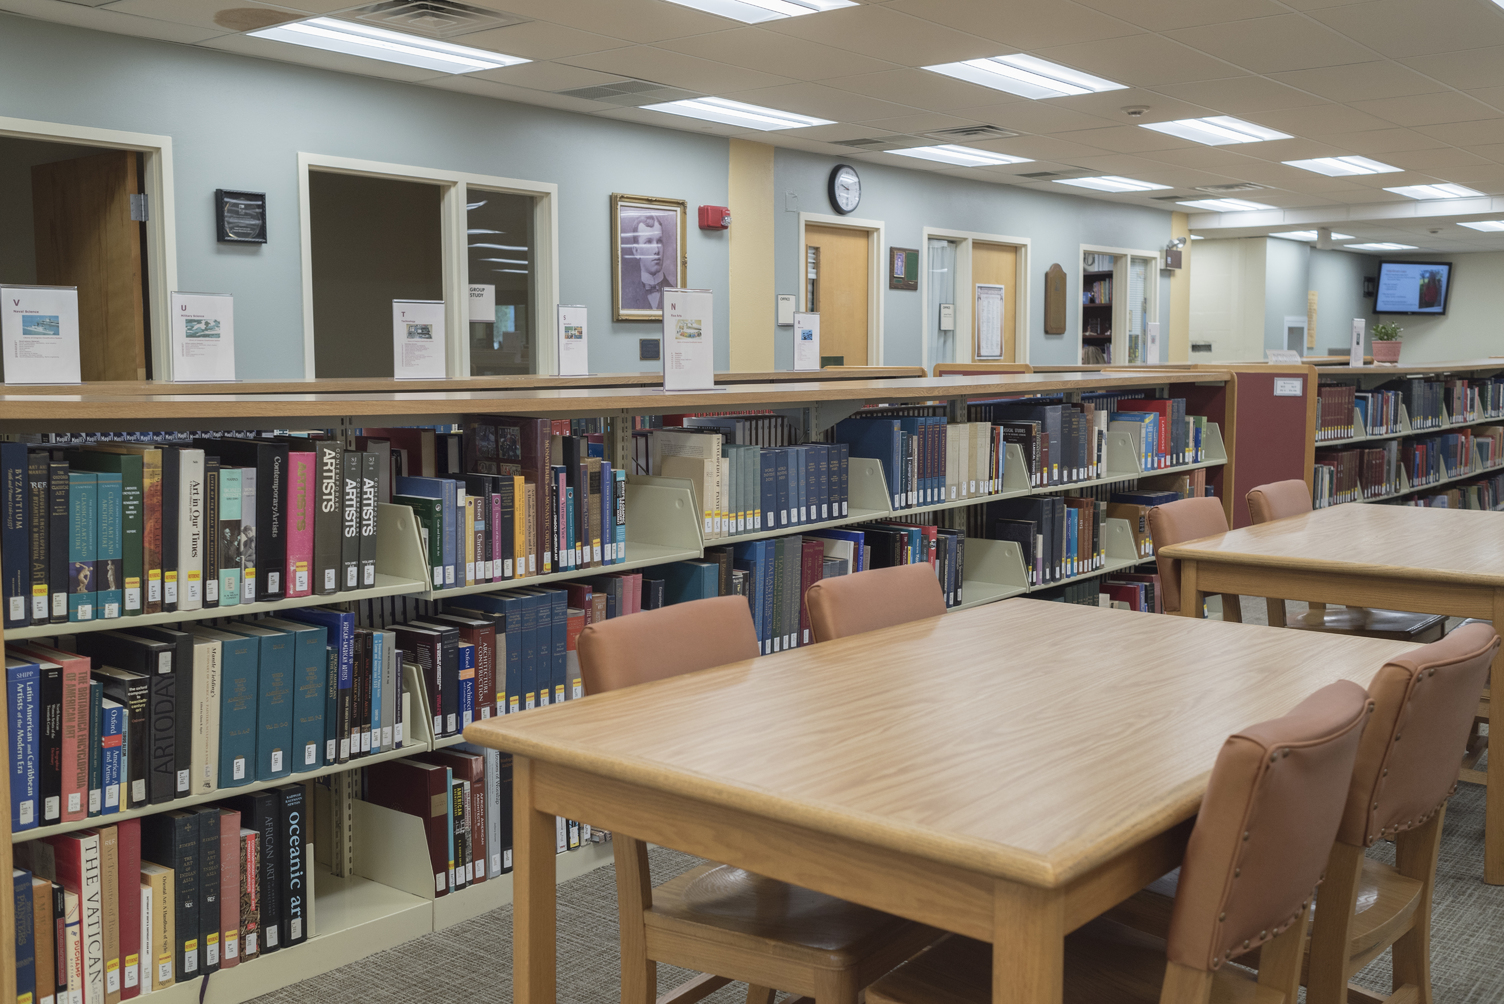 UPDATED: New hours announced for Cannon Memorial Library building